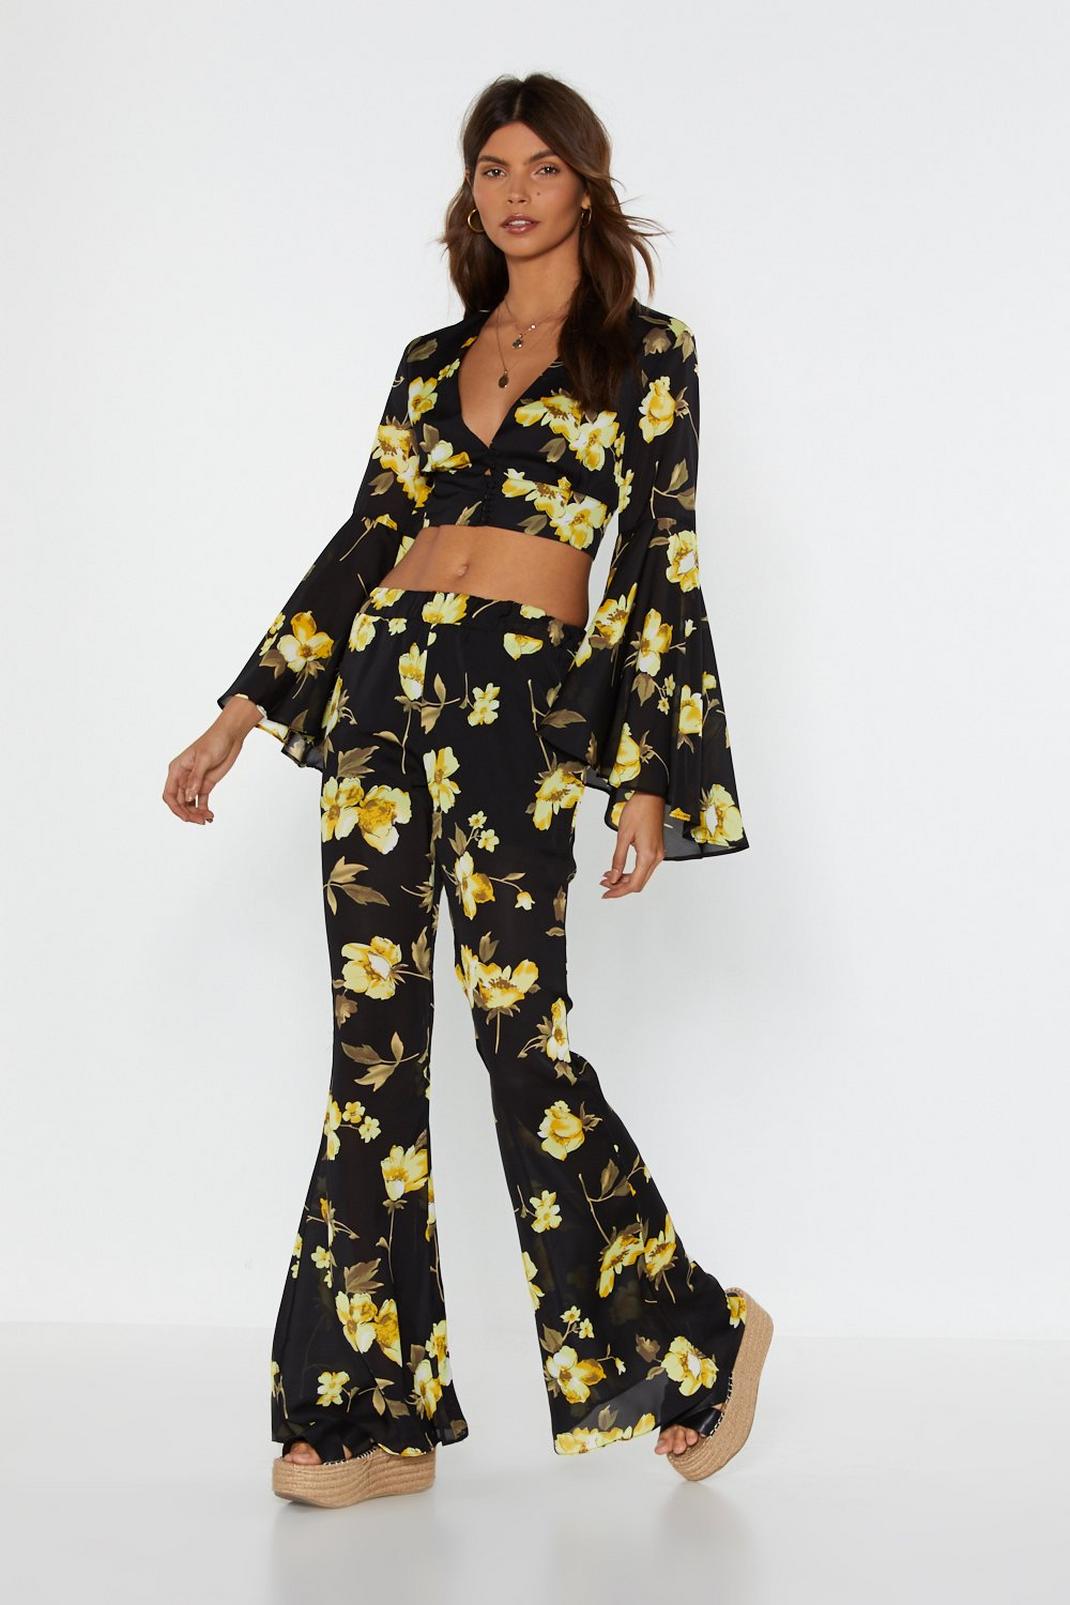 Bloom Where You Are Planted Floral Flare Pants image number 1